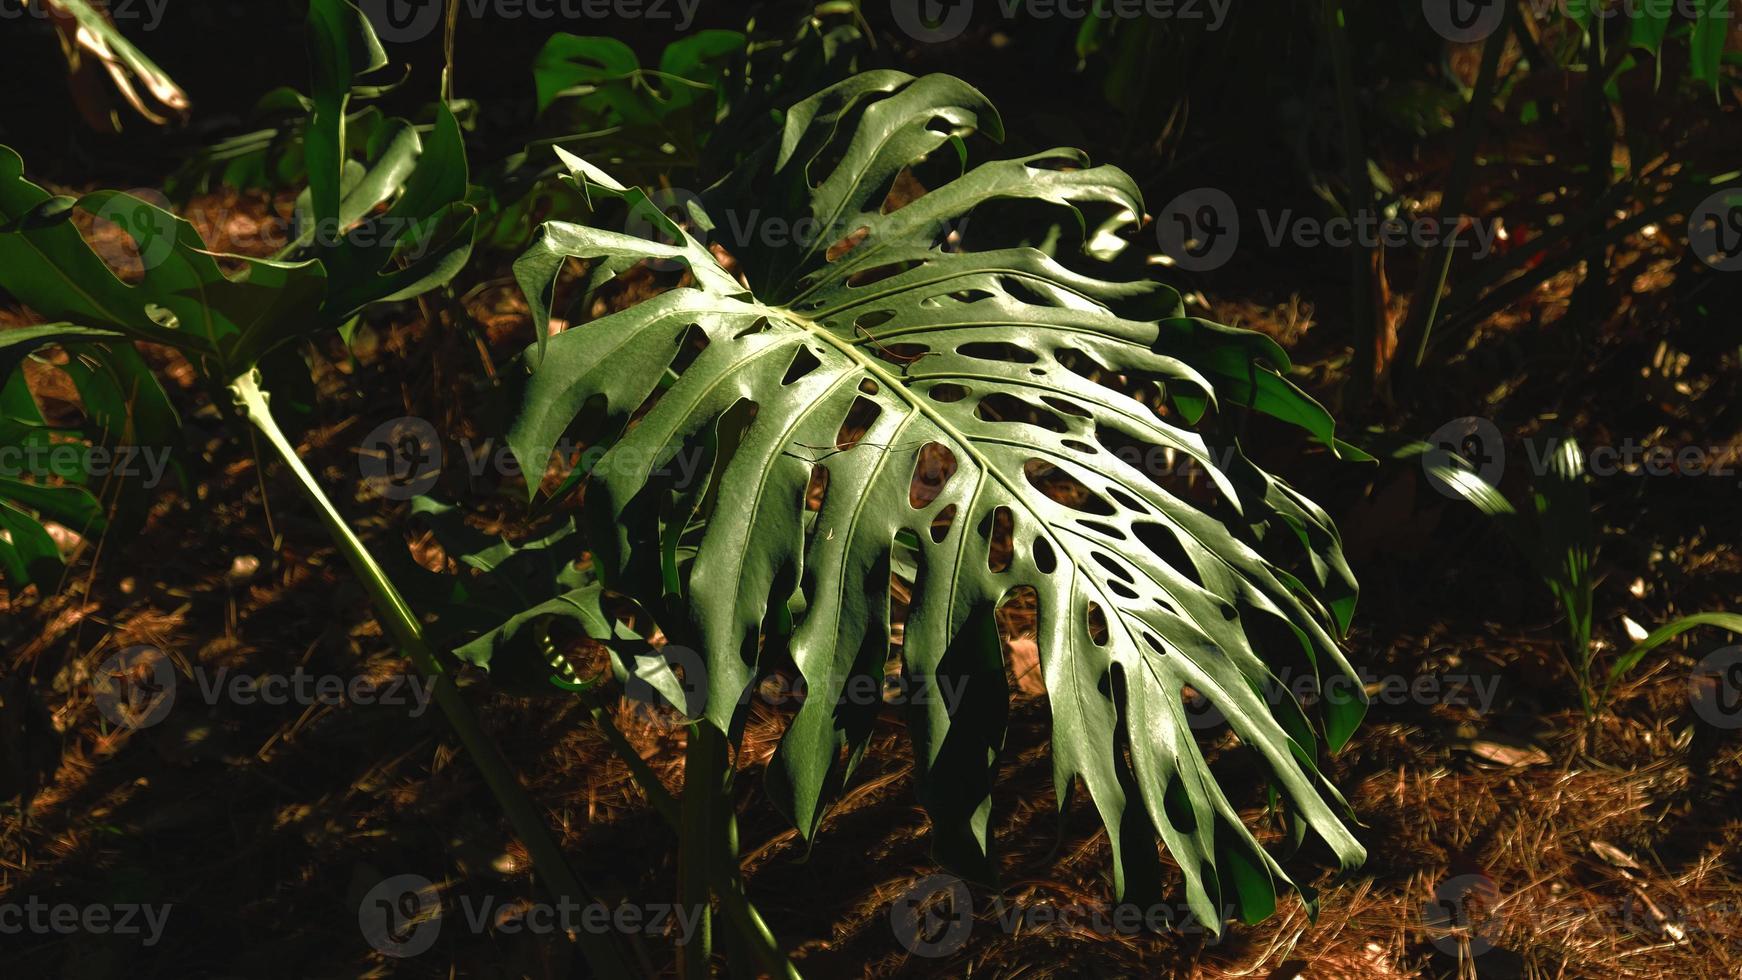 Green leaves of plant Monstera grows in wild climbing tree jungle, rainforest plants evergreen vines bushes. Tropical jungle foliage pattern concept background. photo